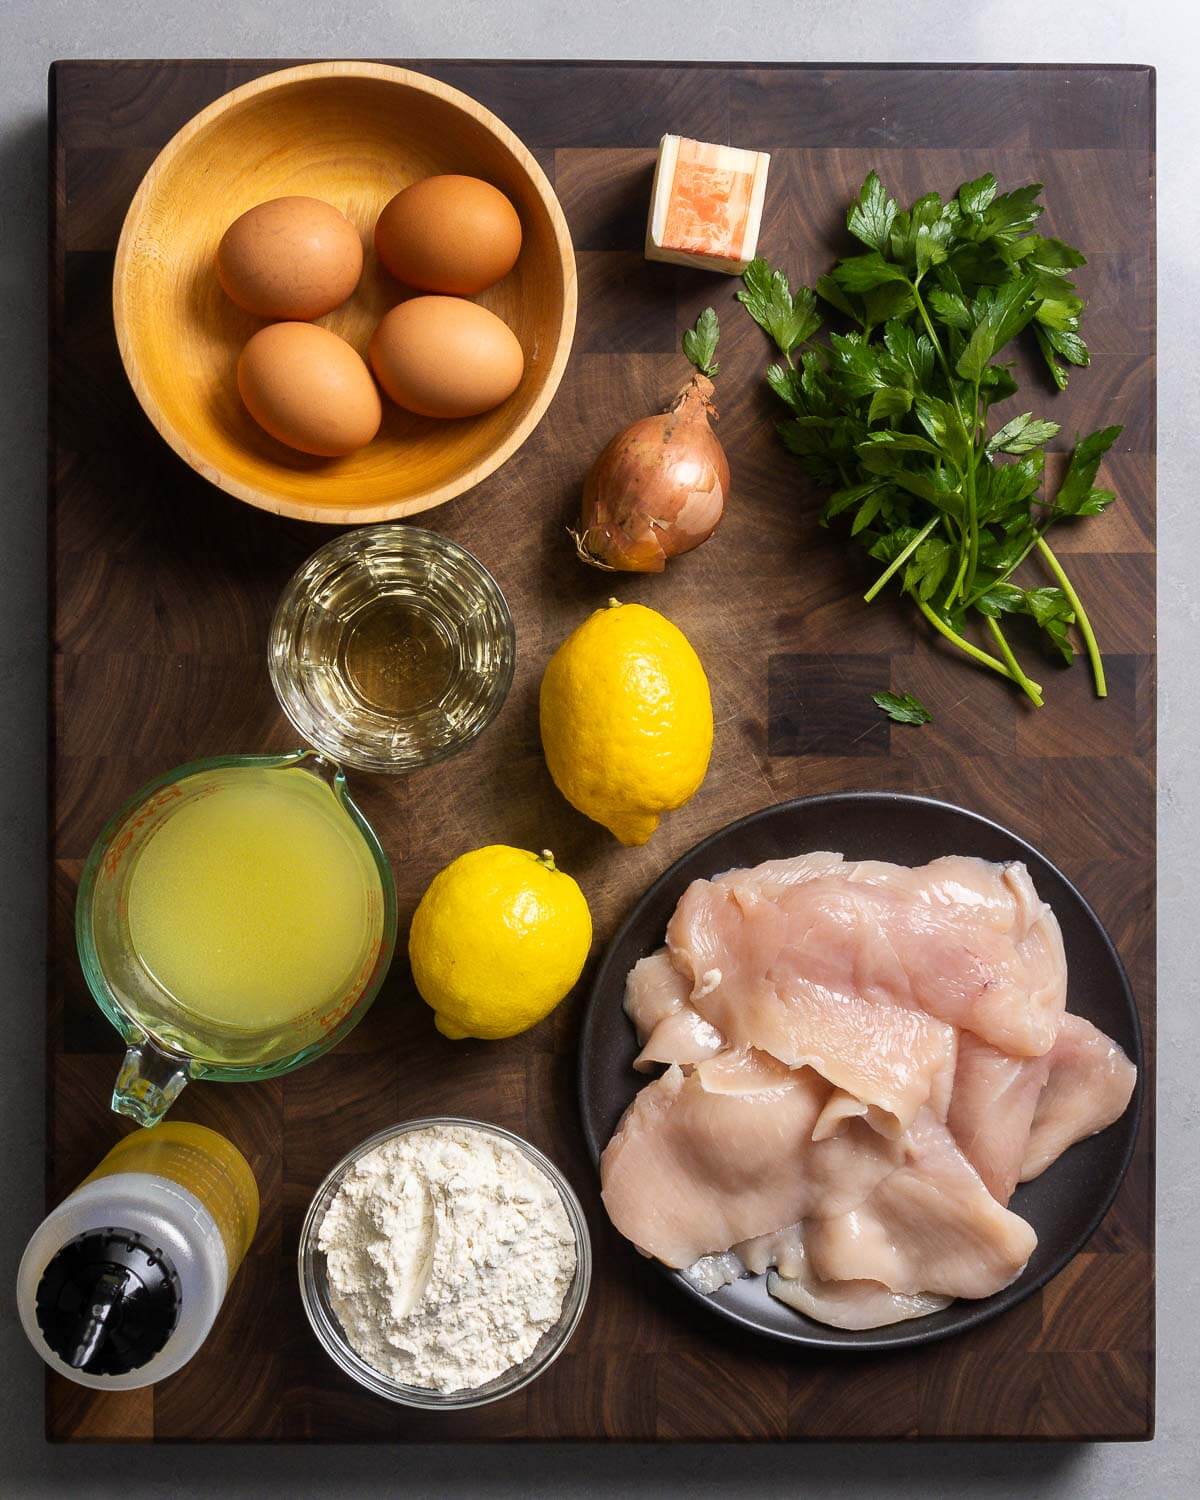 Ingredients shown: eggs, butter, shallot, parsley, white wine, chicken stock, lemons, olive oil, flour, and chicken cutlets.